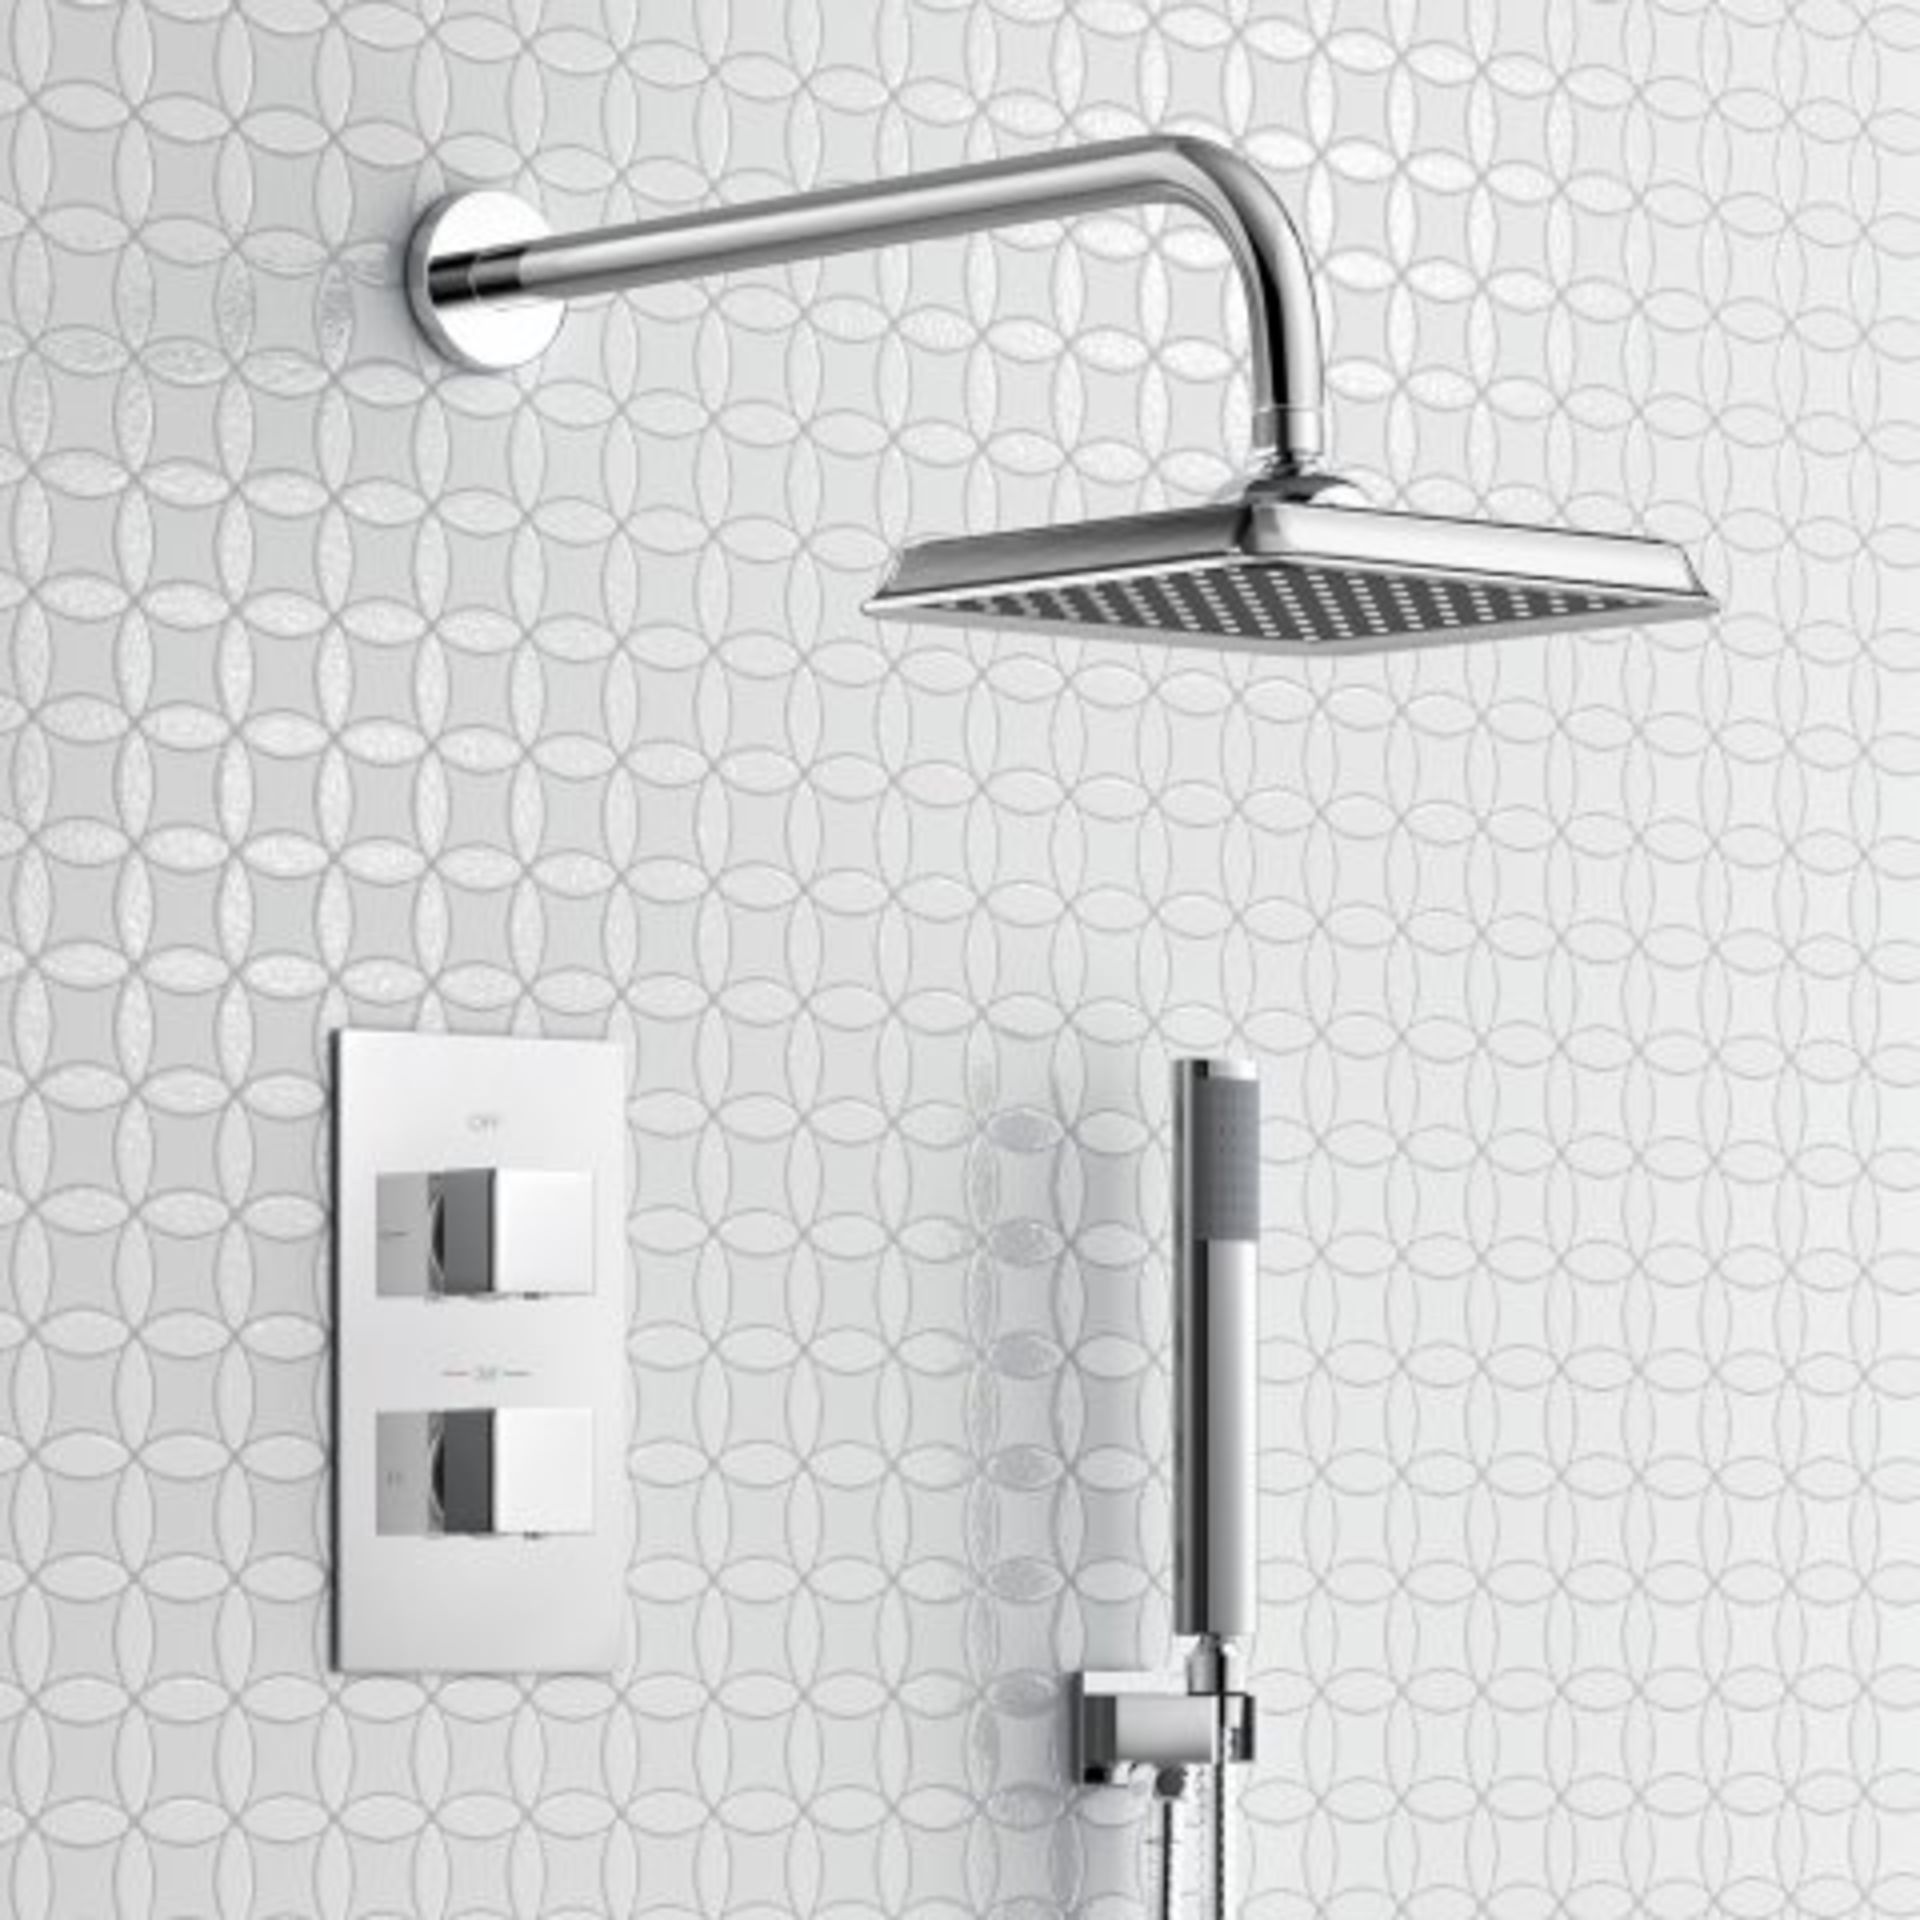 (H36) 200mm Square Wall Mounted Head, Handheld & Thermostatic Mixer Shower Kit. RRP £299.99. - Image 4 of 4